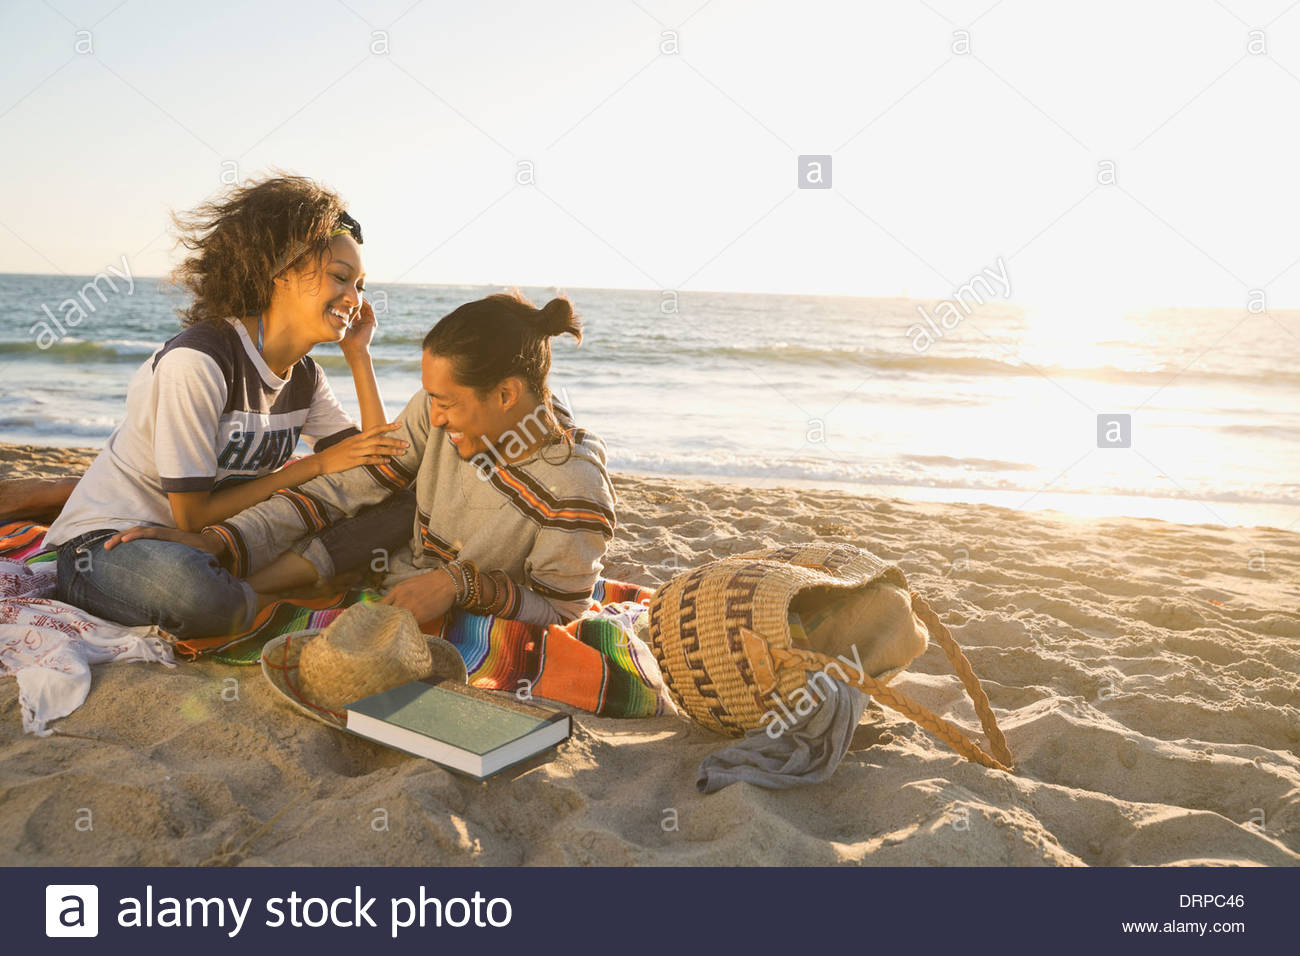 Couple spending leisure time at beach Stock Photo